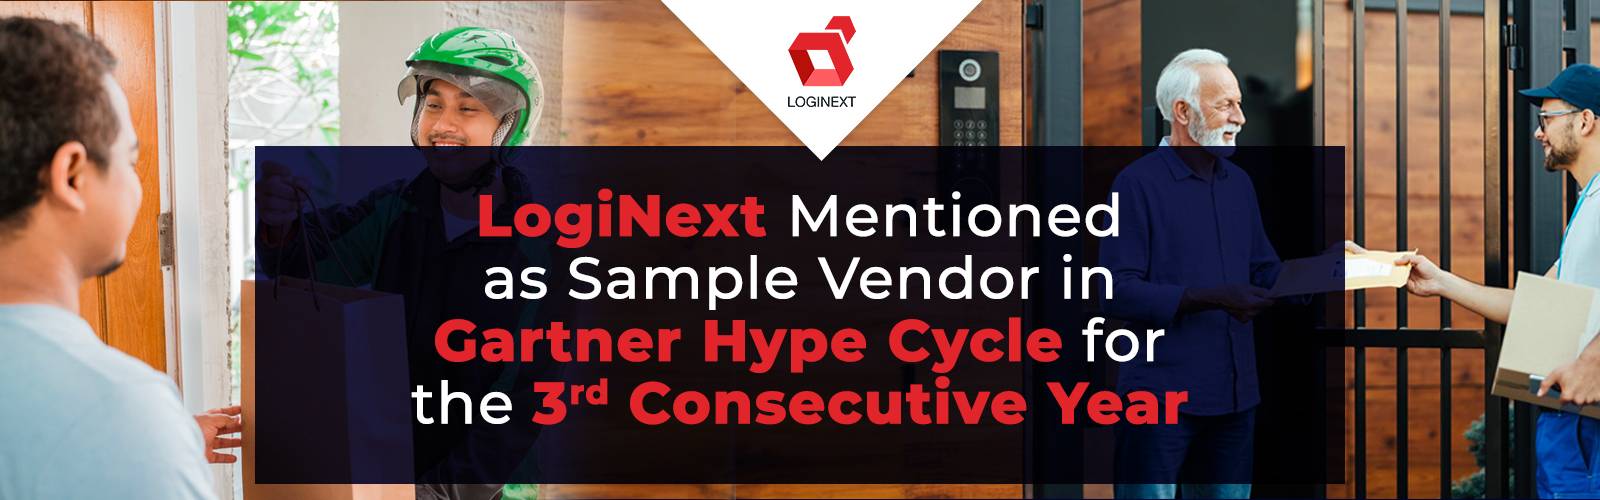 Gartner Hype Cycle 2023 mentions LogiNext as Sample Vendor